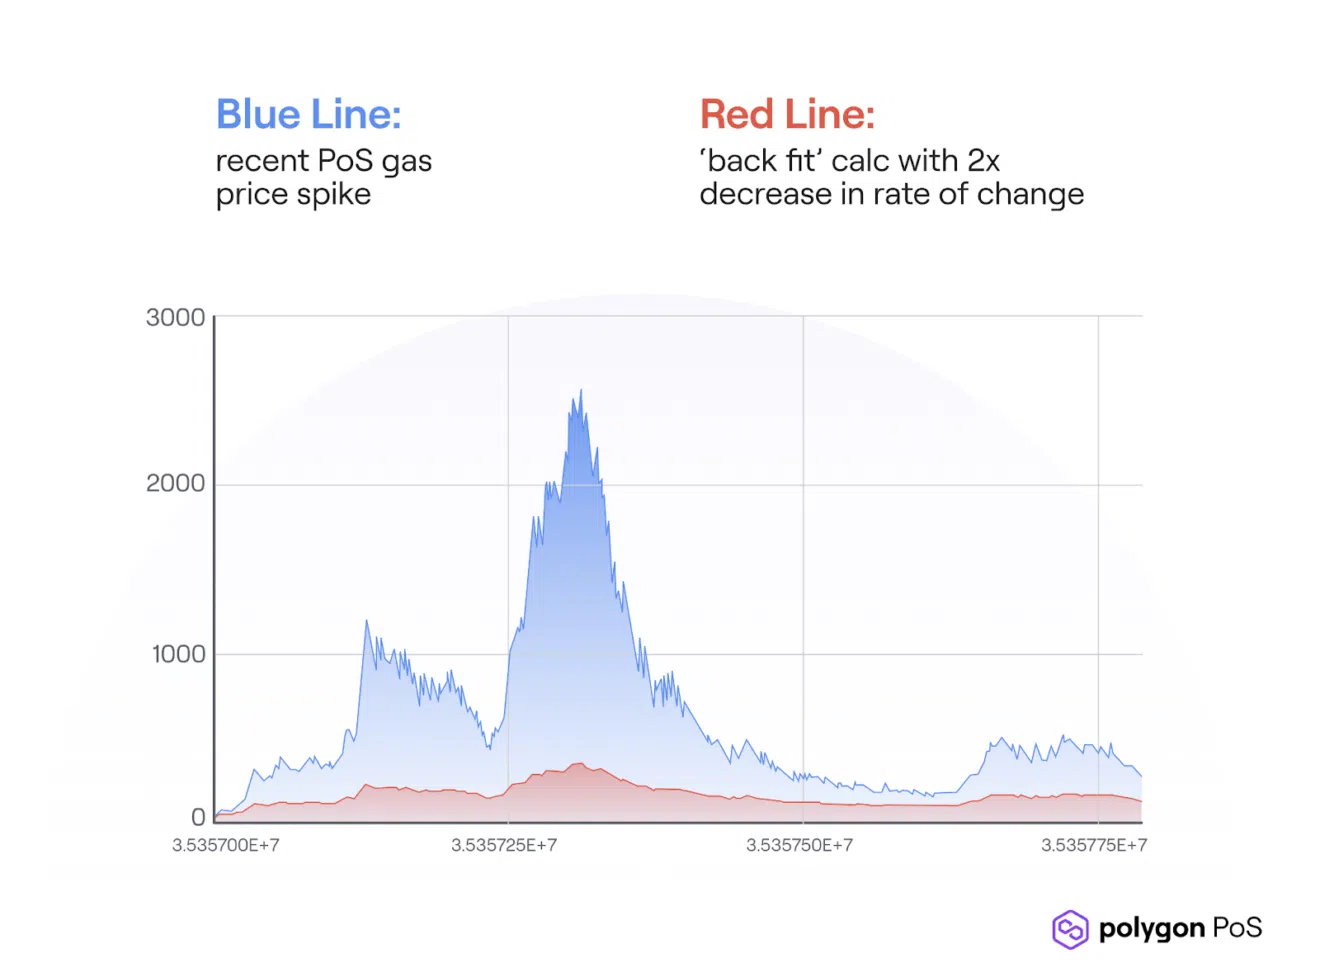 ecent gas price spikes on the Polygon PoS chain (blue) compared with Polygon’s data-driven expectations post hard fork (red). Source. Polygon.